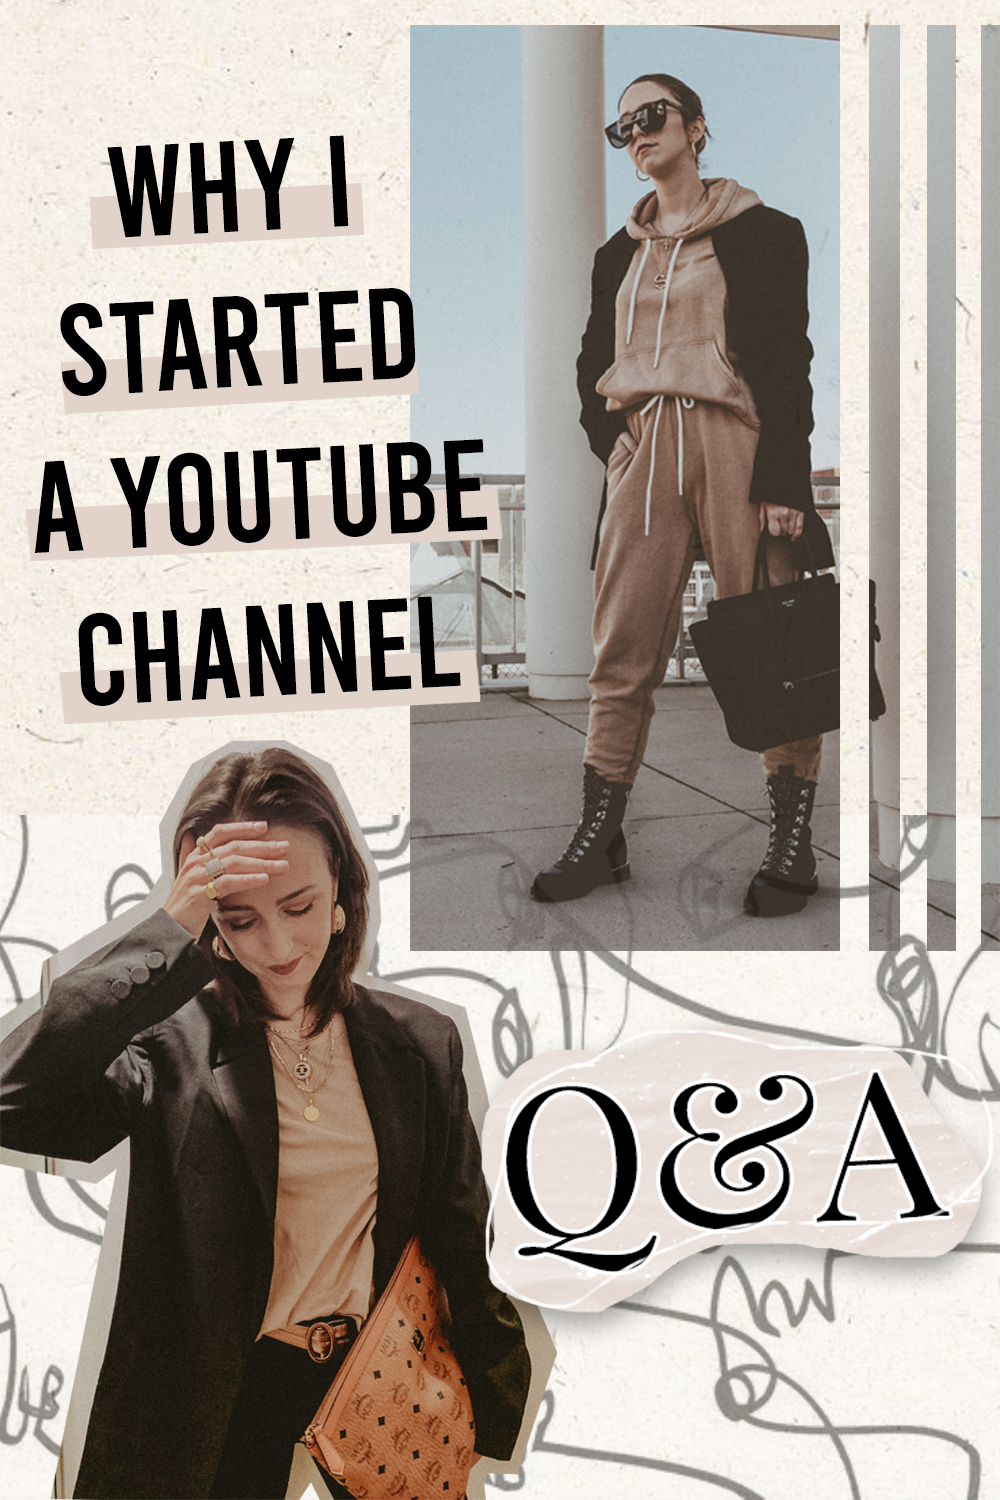 Why I Started A YouTube Channel - Simply by Simone - Simone Piliero - YouTube - Westchester Coutny - Blogger - Vlog - Q and A - Get To Know Me #youtube #newyoutube #westchester #newyork #nyblogger #newyorkblogger #fashionblogger #styleblogger #outfits #resturants #events #newyoutuber #gettoknowme #bloggingtips #photoshop